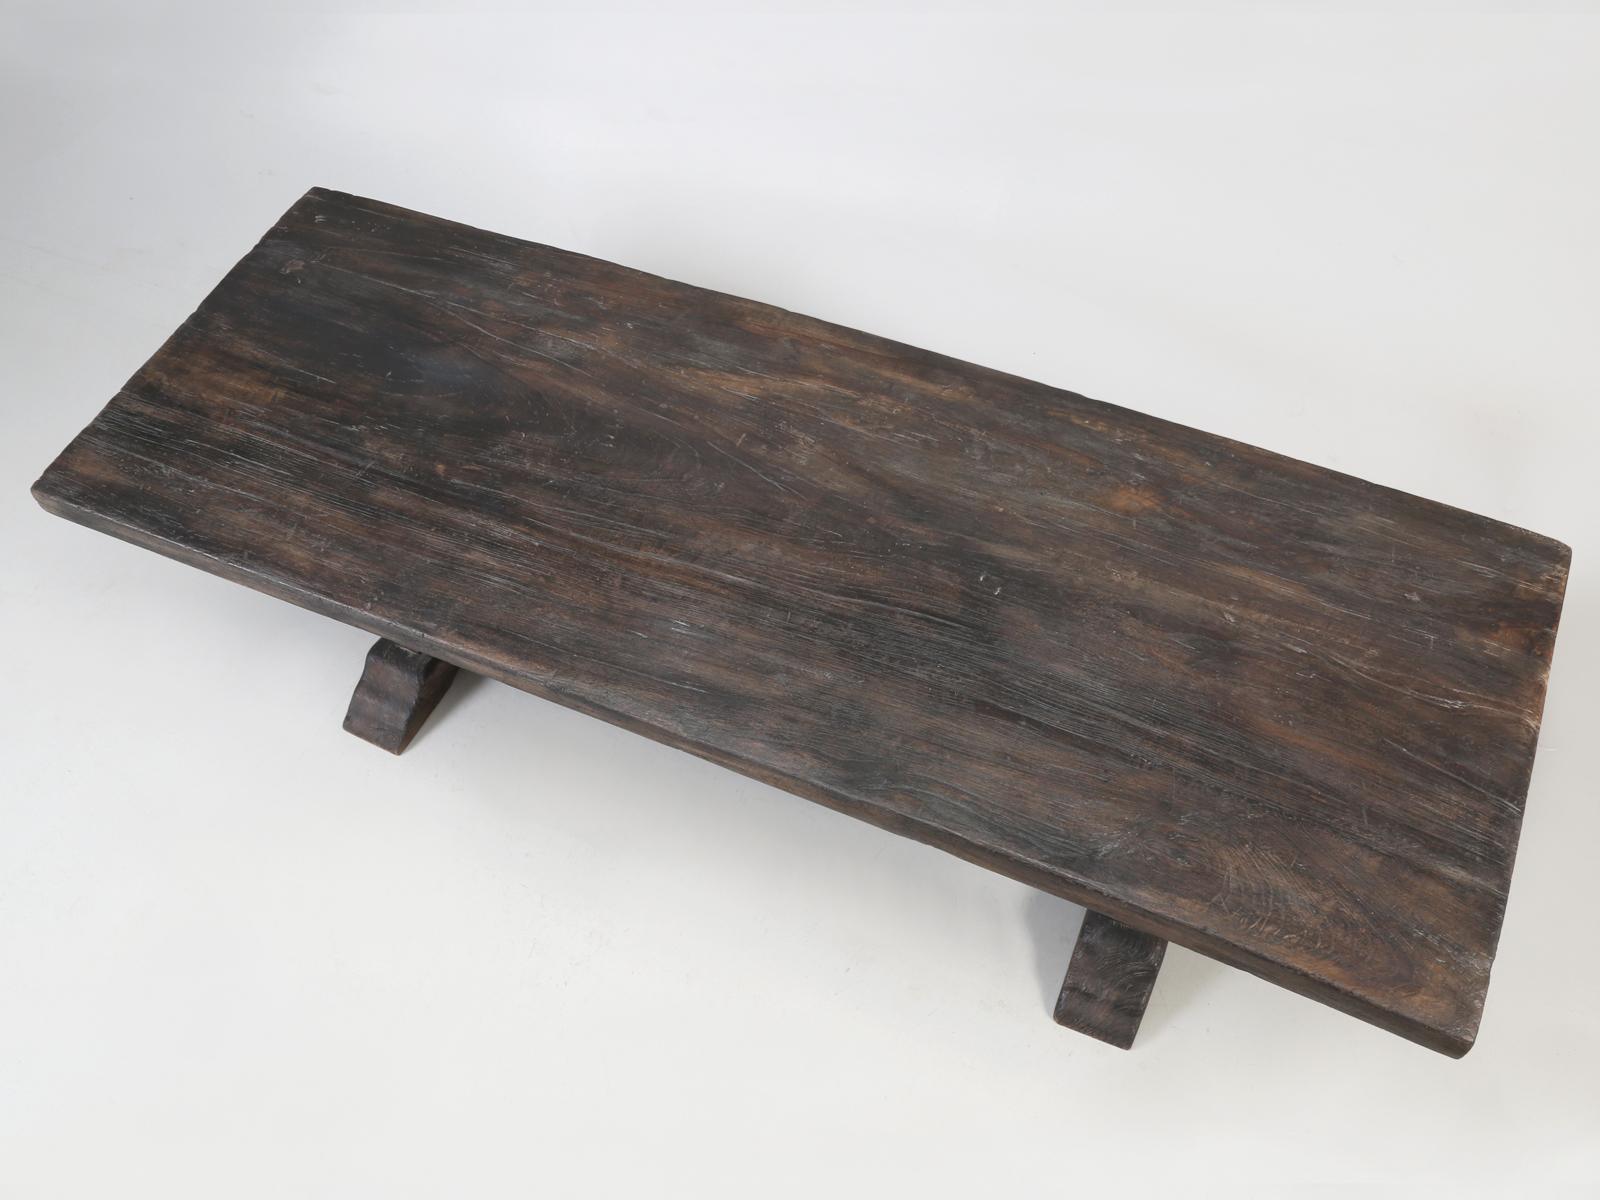 Antique French trestle dining table, or just call it a French farm house table, this antique French table, looks like you just dragged it out of the barn and barely wiped it off. In reality, that is exactly the finish we tried to copy for our